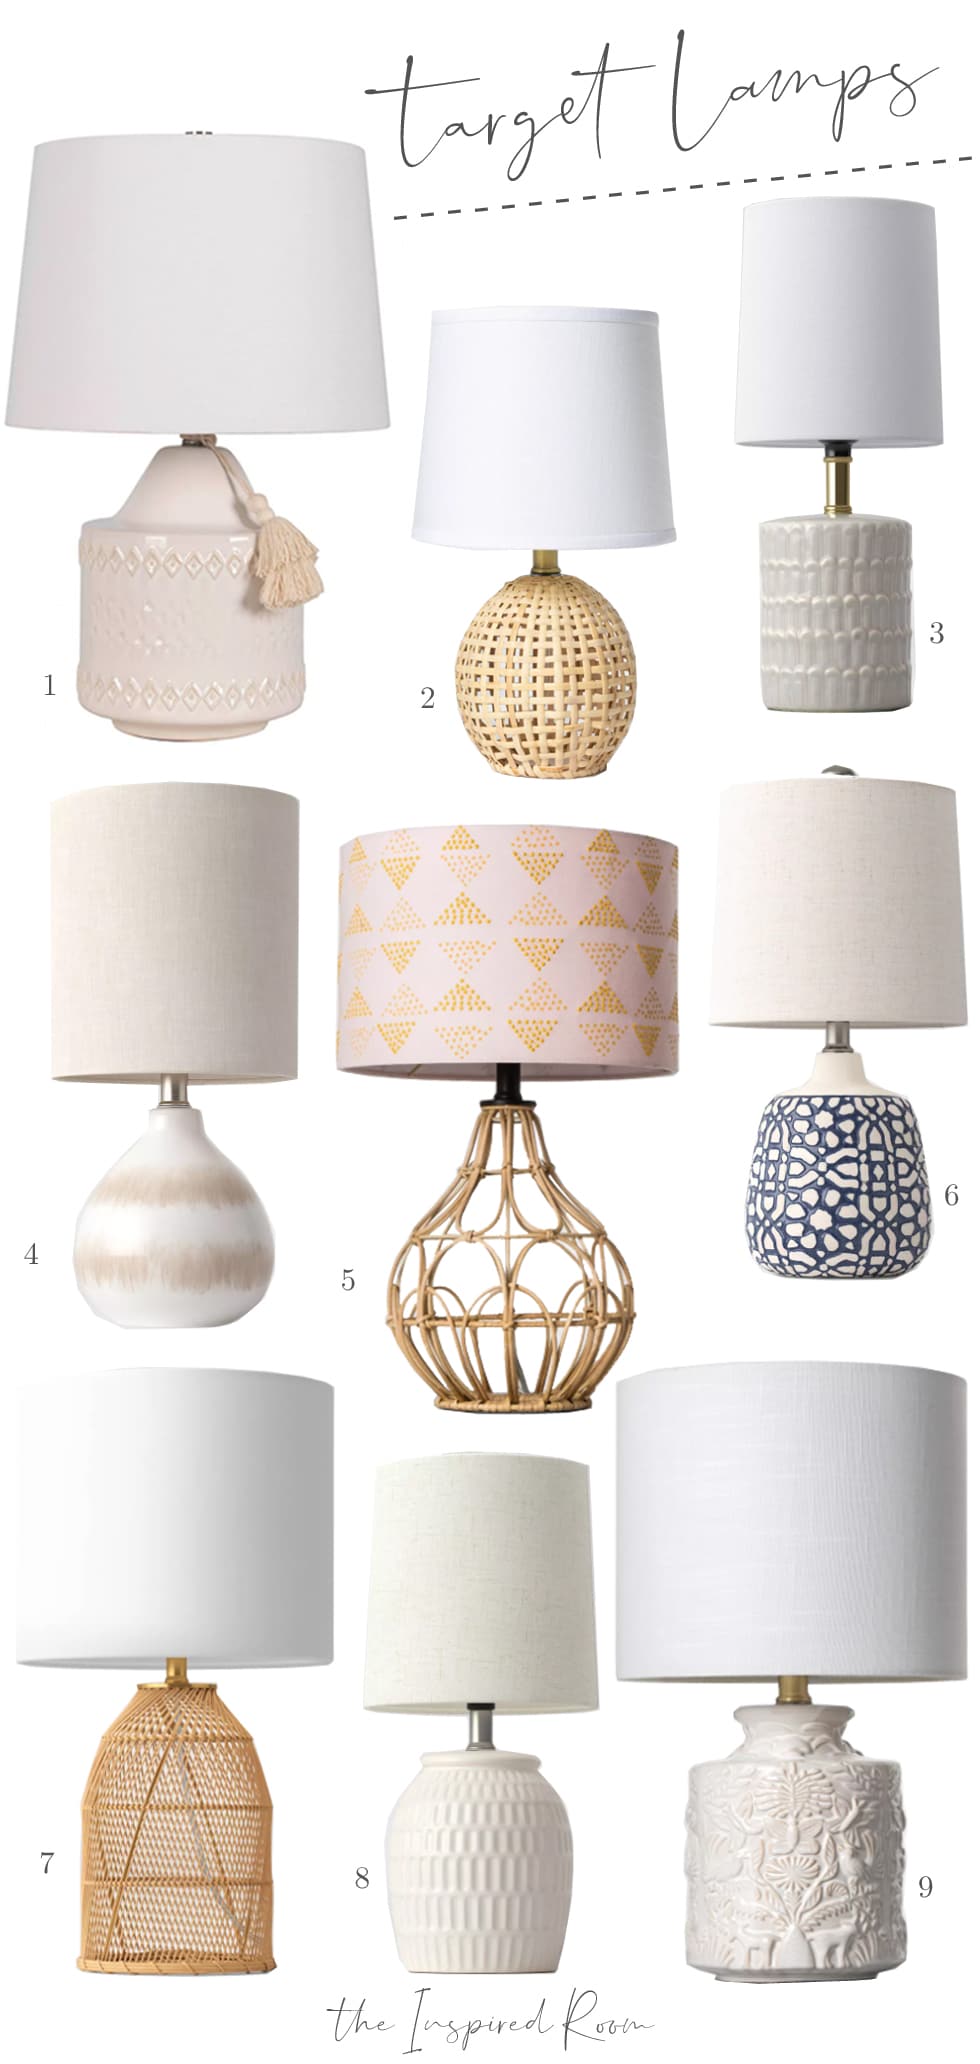 9 Affordable Lamps from Target - The Inspired Room